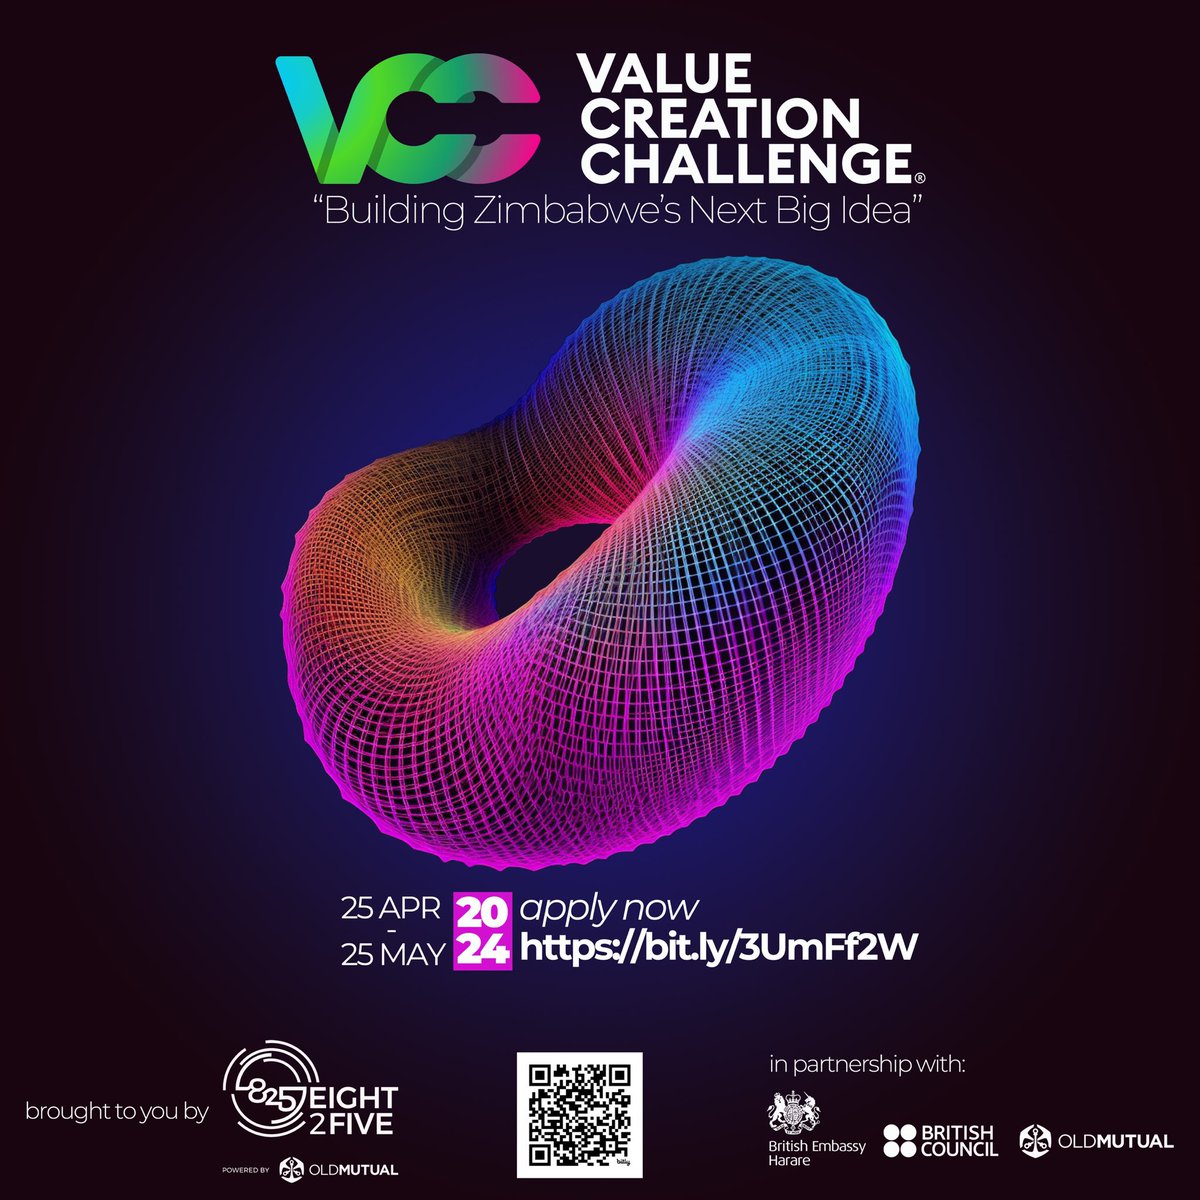 Be part of the most exciting business competition #ValueCreationChallenge VCC4 is here with an opportunity for innovative businesses to build Zimbabwe’s next Big Idea. Visit bit.ly/3UmFf2W apply by May 25, 2024.